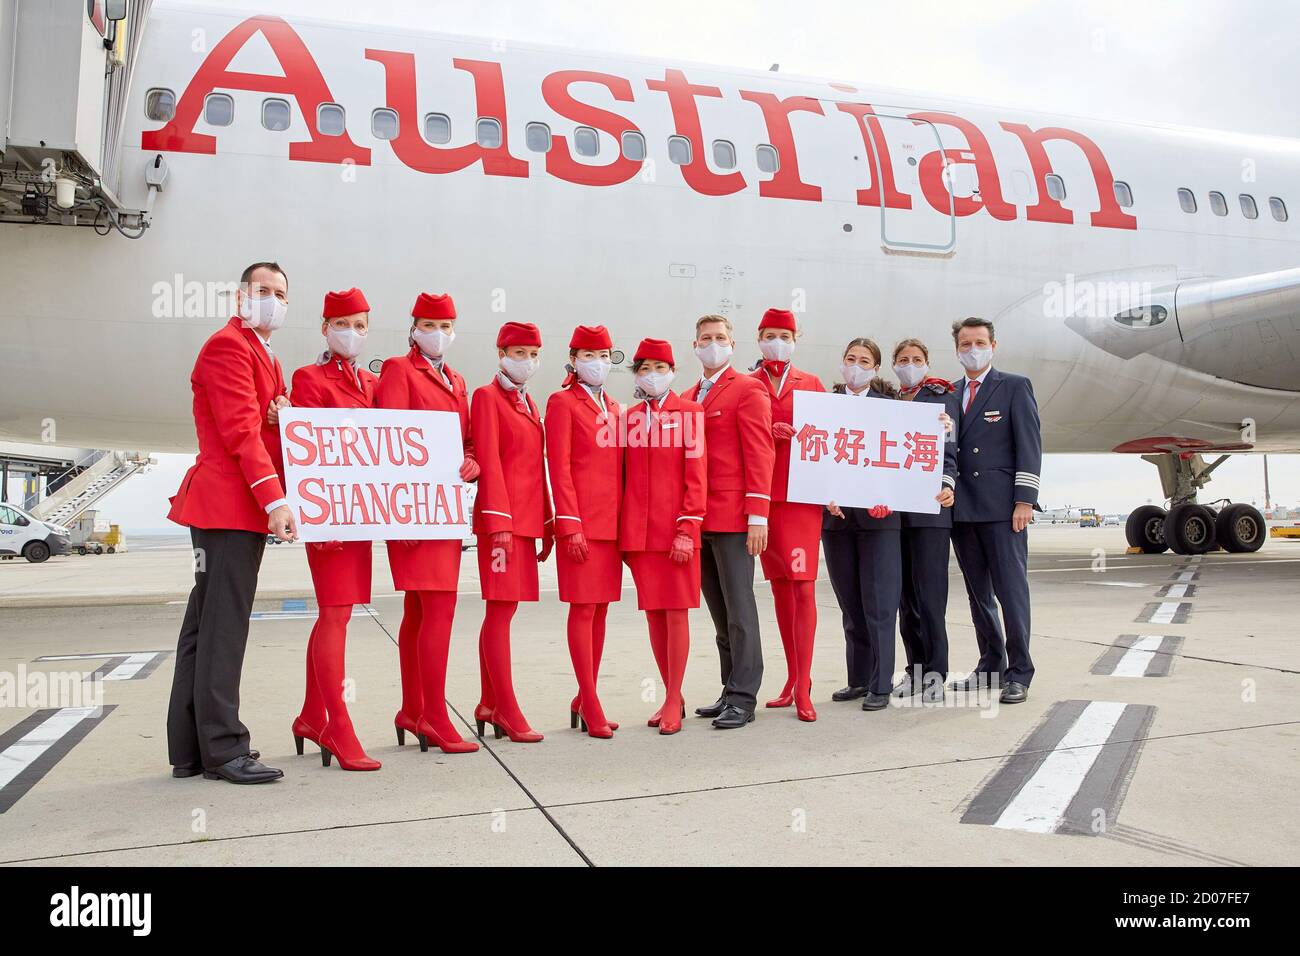 Vienna, Austria. 2nd Oct, 2020. Crew of Austrian Airlines' first resumed passenger flight to Shanghai pose for a group photo at the Vienna International Airport in Schwechat, Austria, on Oct. 2, 2020. Austrian Airlines resumed passenger flights to Shanghai on Friday, which were suspended due to the COVID-19 pandemic. Credit: Georges Schneider/Xinhua/Alamy Live News Stock Photo